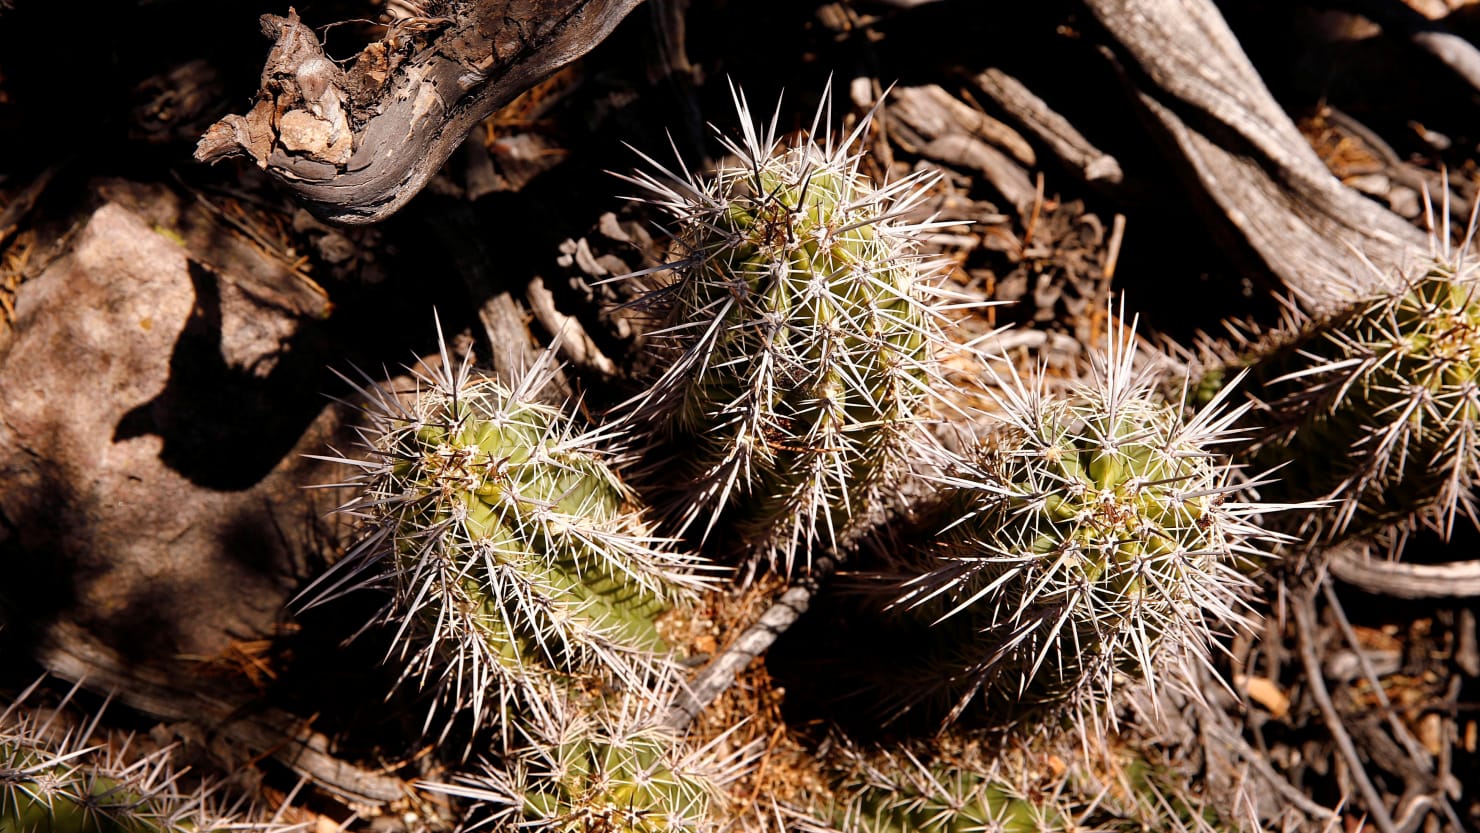 Arizona Man Accused of Trading Protected Cacti for Drugs